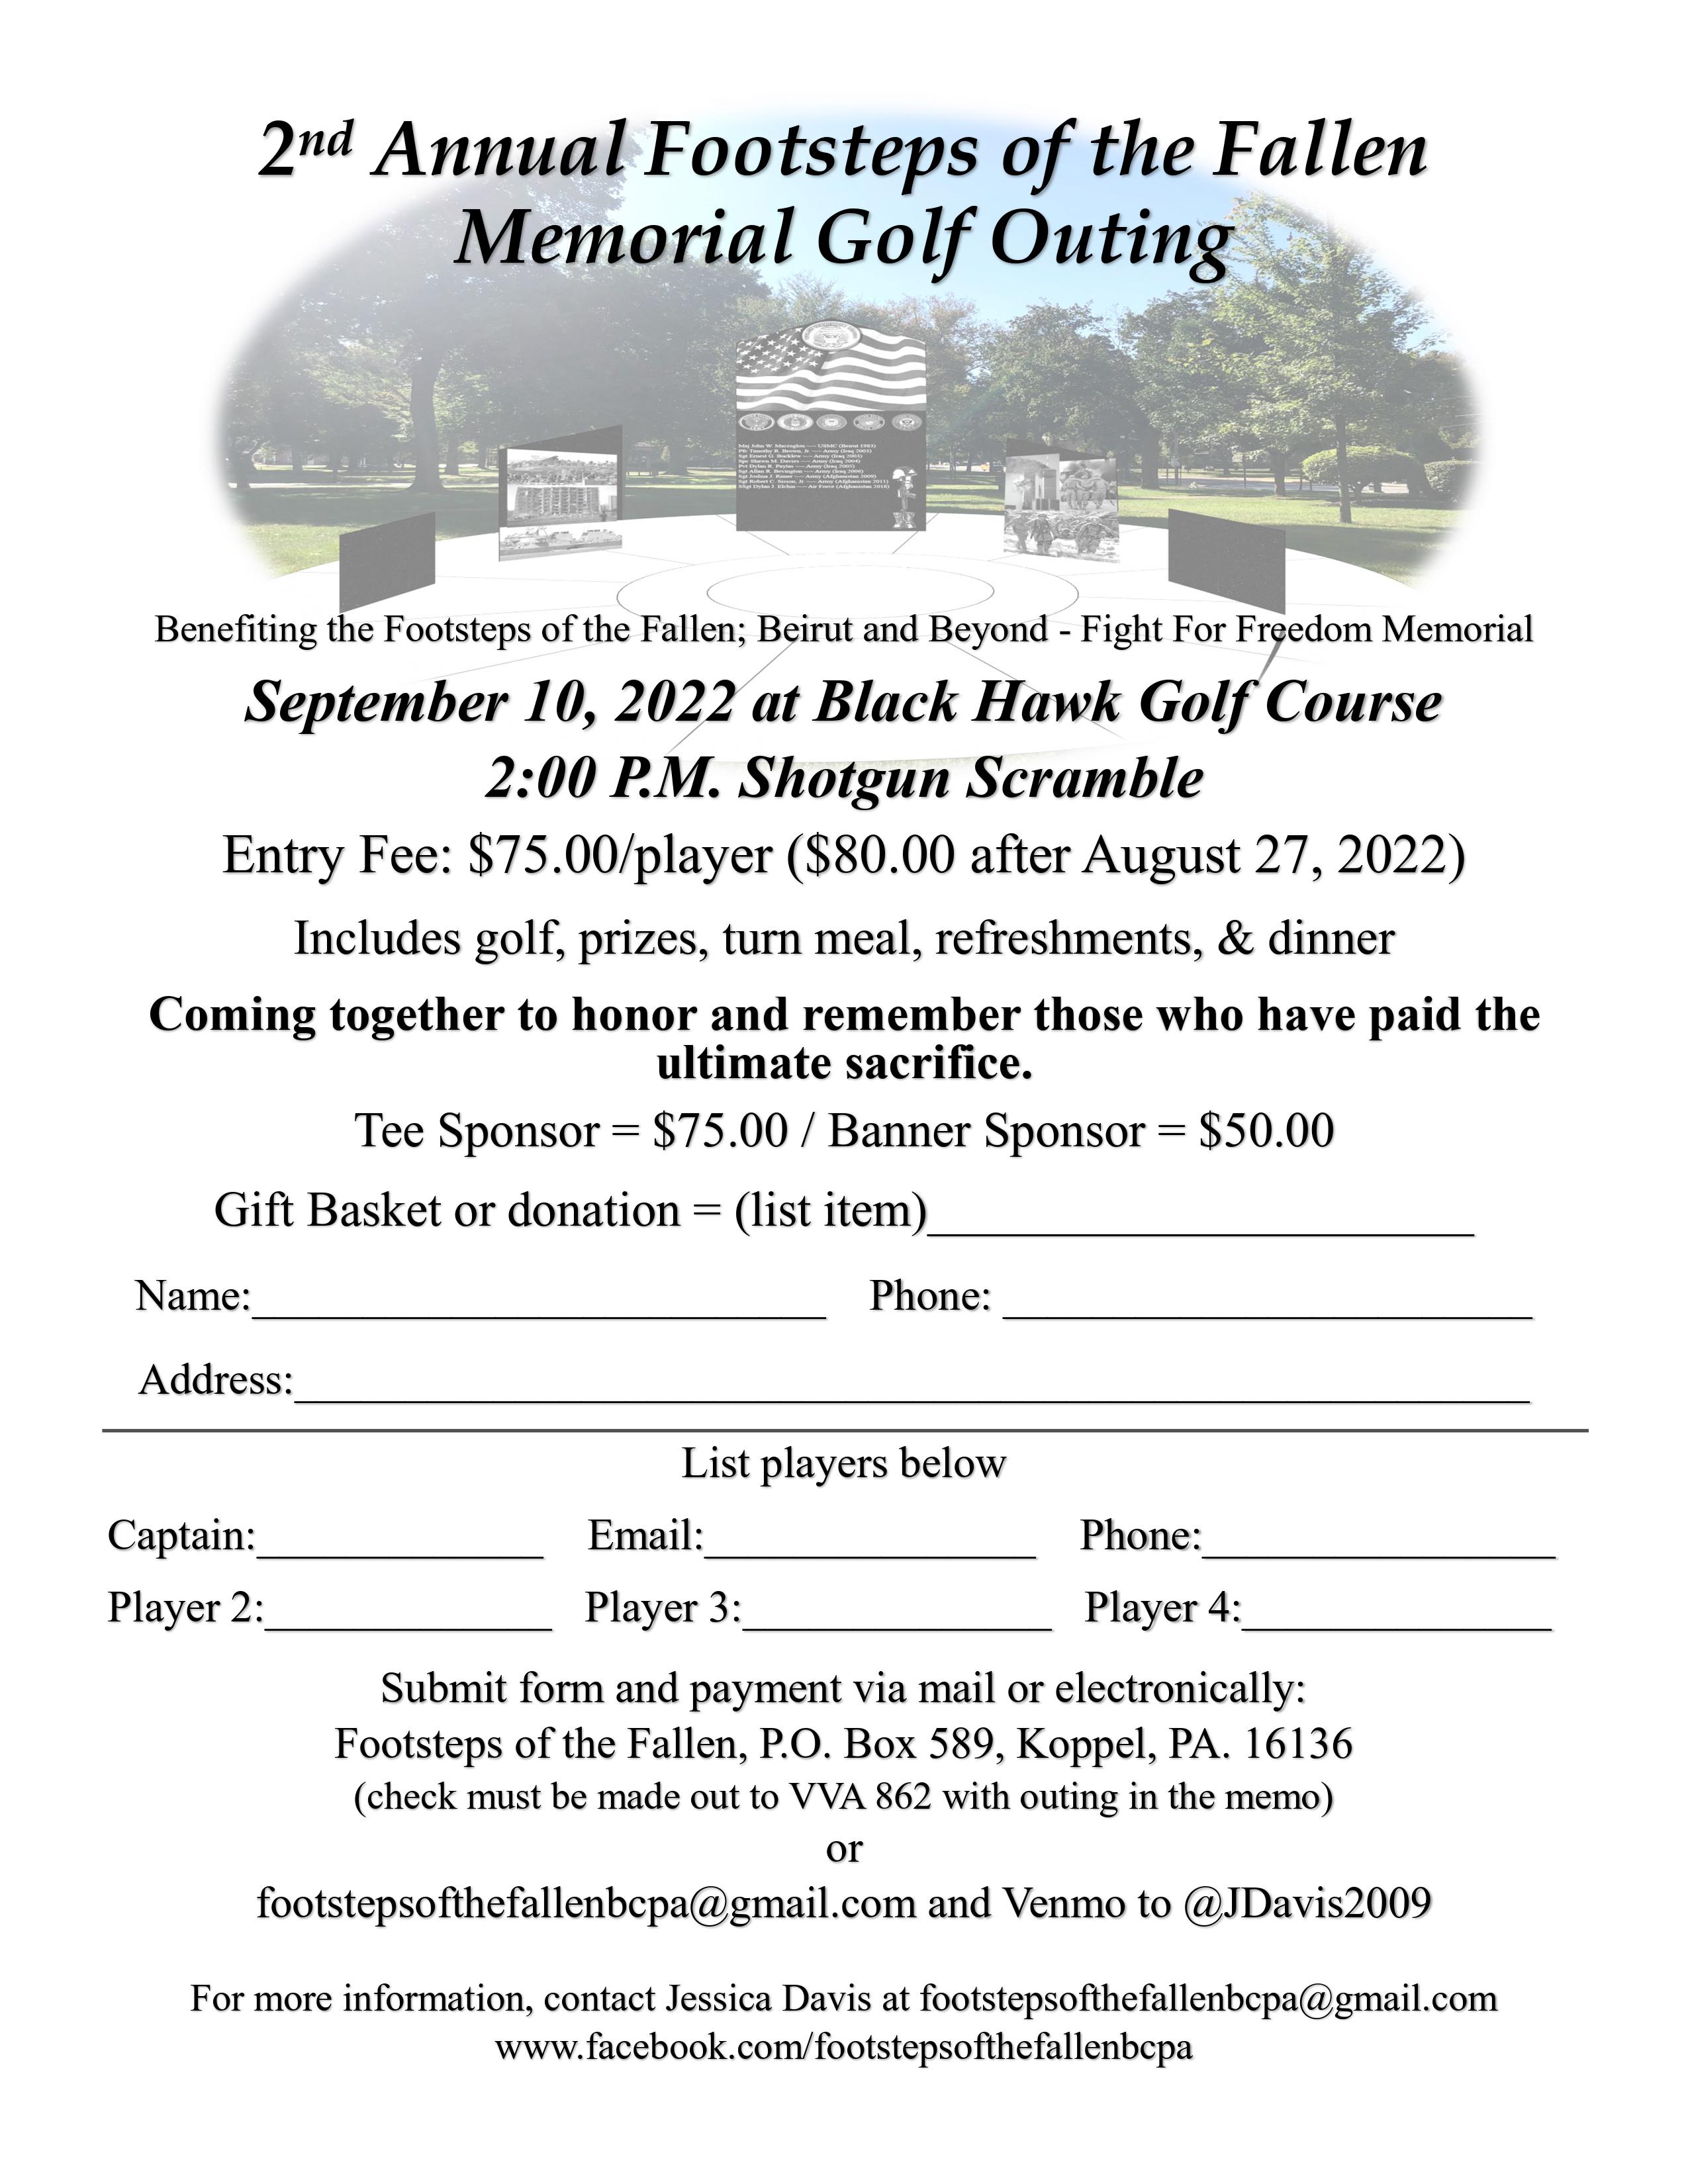 Footstep of the Fallen Memorial Golf outing